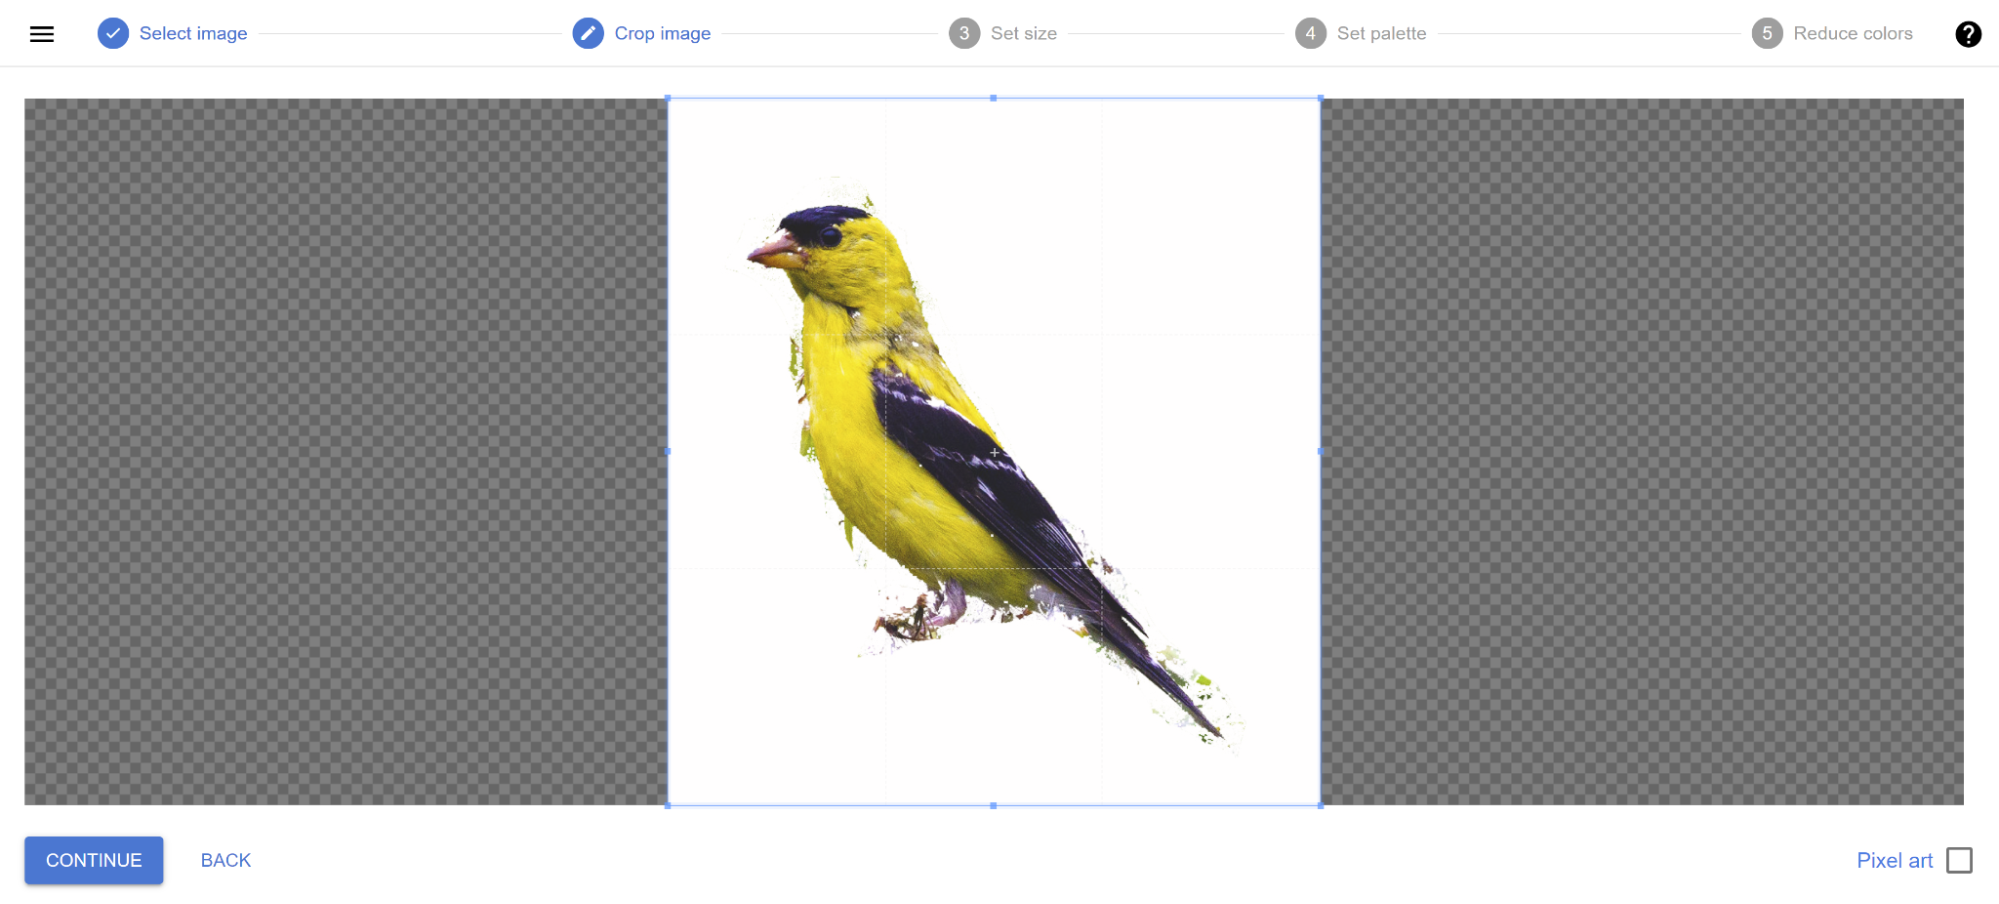 image of a bird imported into flosscross